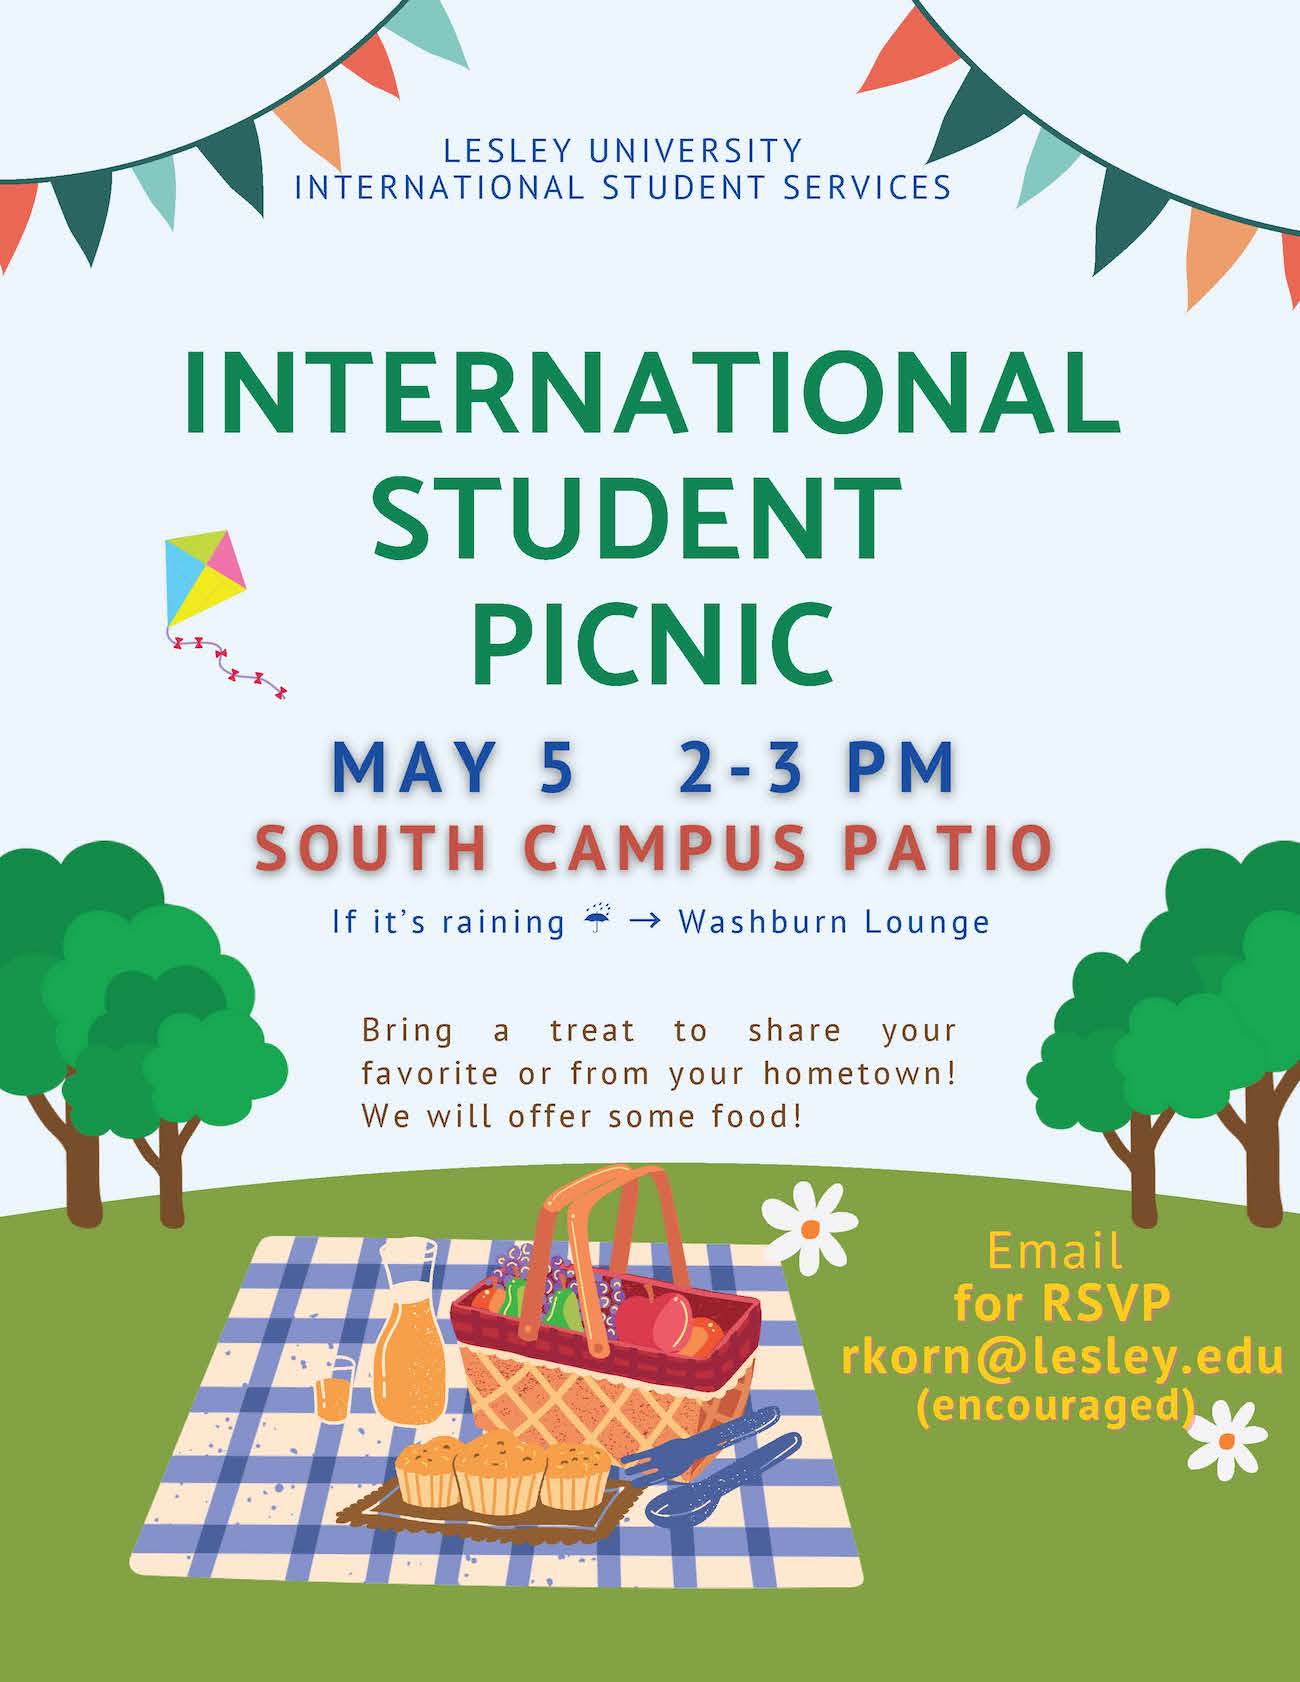 Flyer with illustrated picnic scene that reads: Lesley University International Student Services - International Student Picnic - May 5 2-3pm - South Campus Patio - If it’s raining, Washburn Lounge - Bring a treat to share your favorite or from your hometown! We will offer some food!